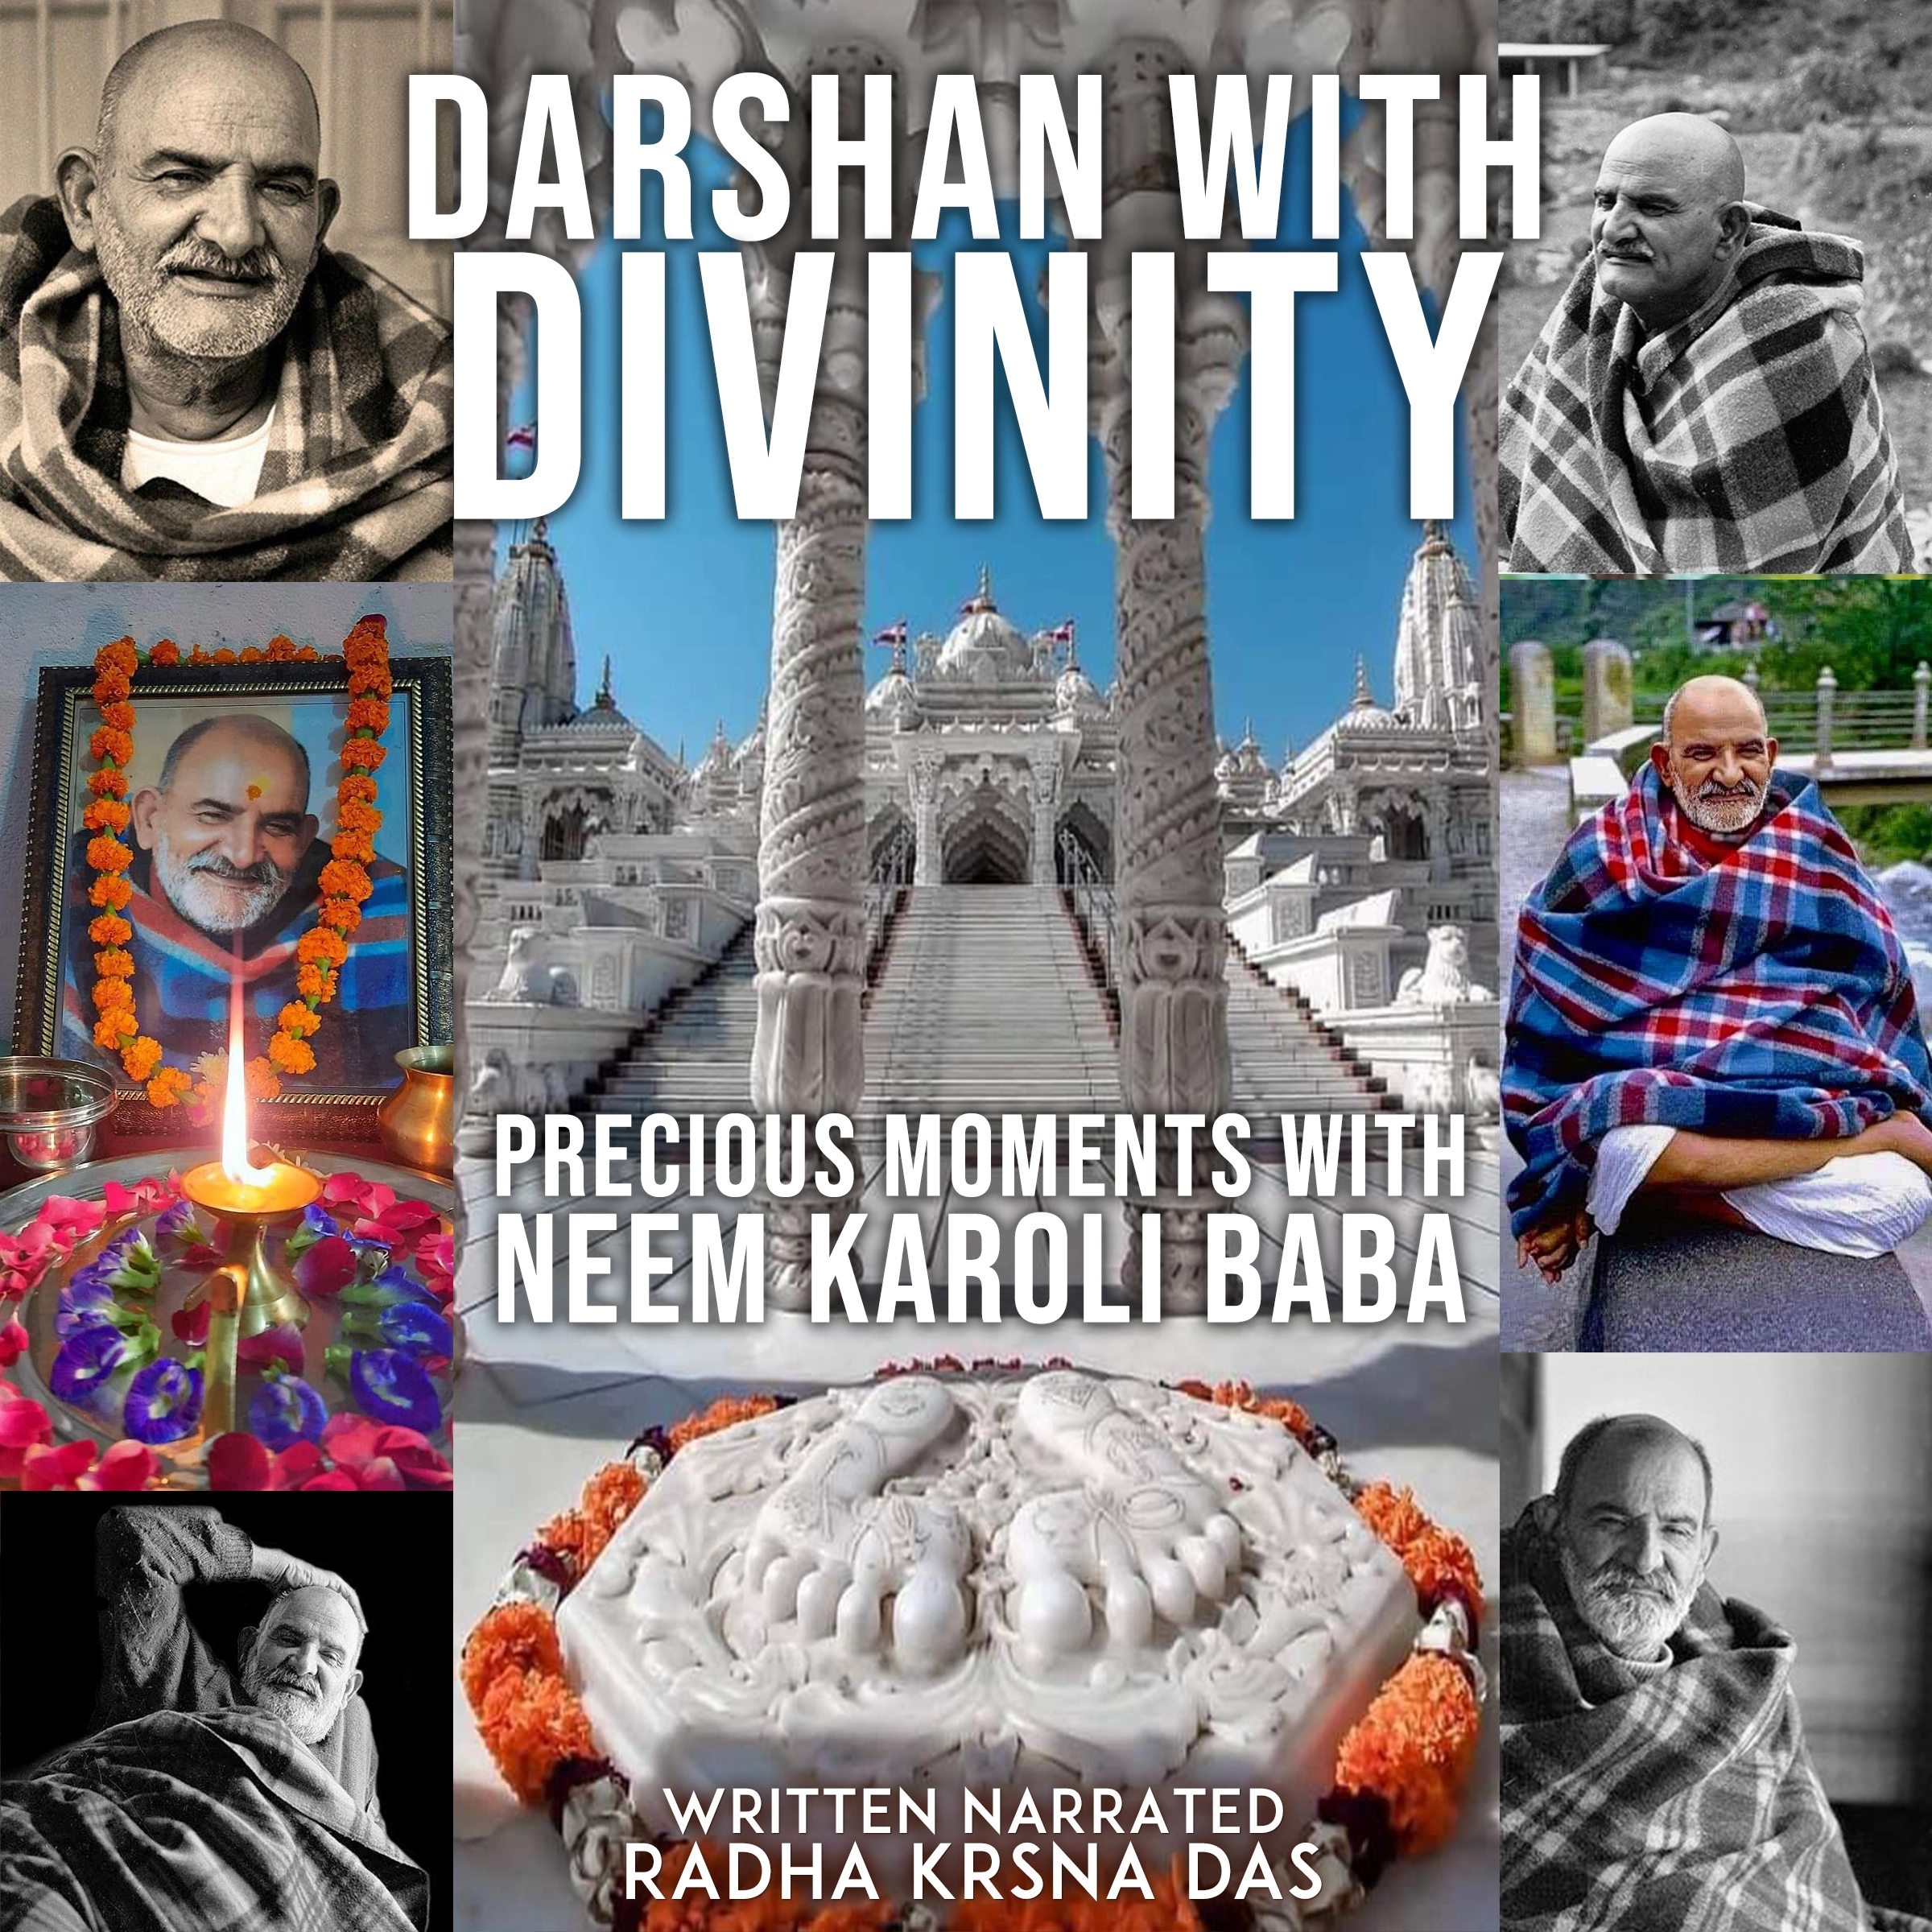 Darshan With Divinity Audiobook by Radha Krsna Das